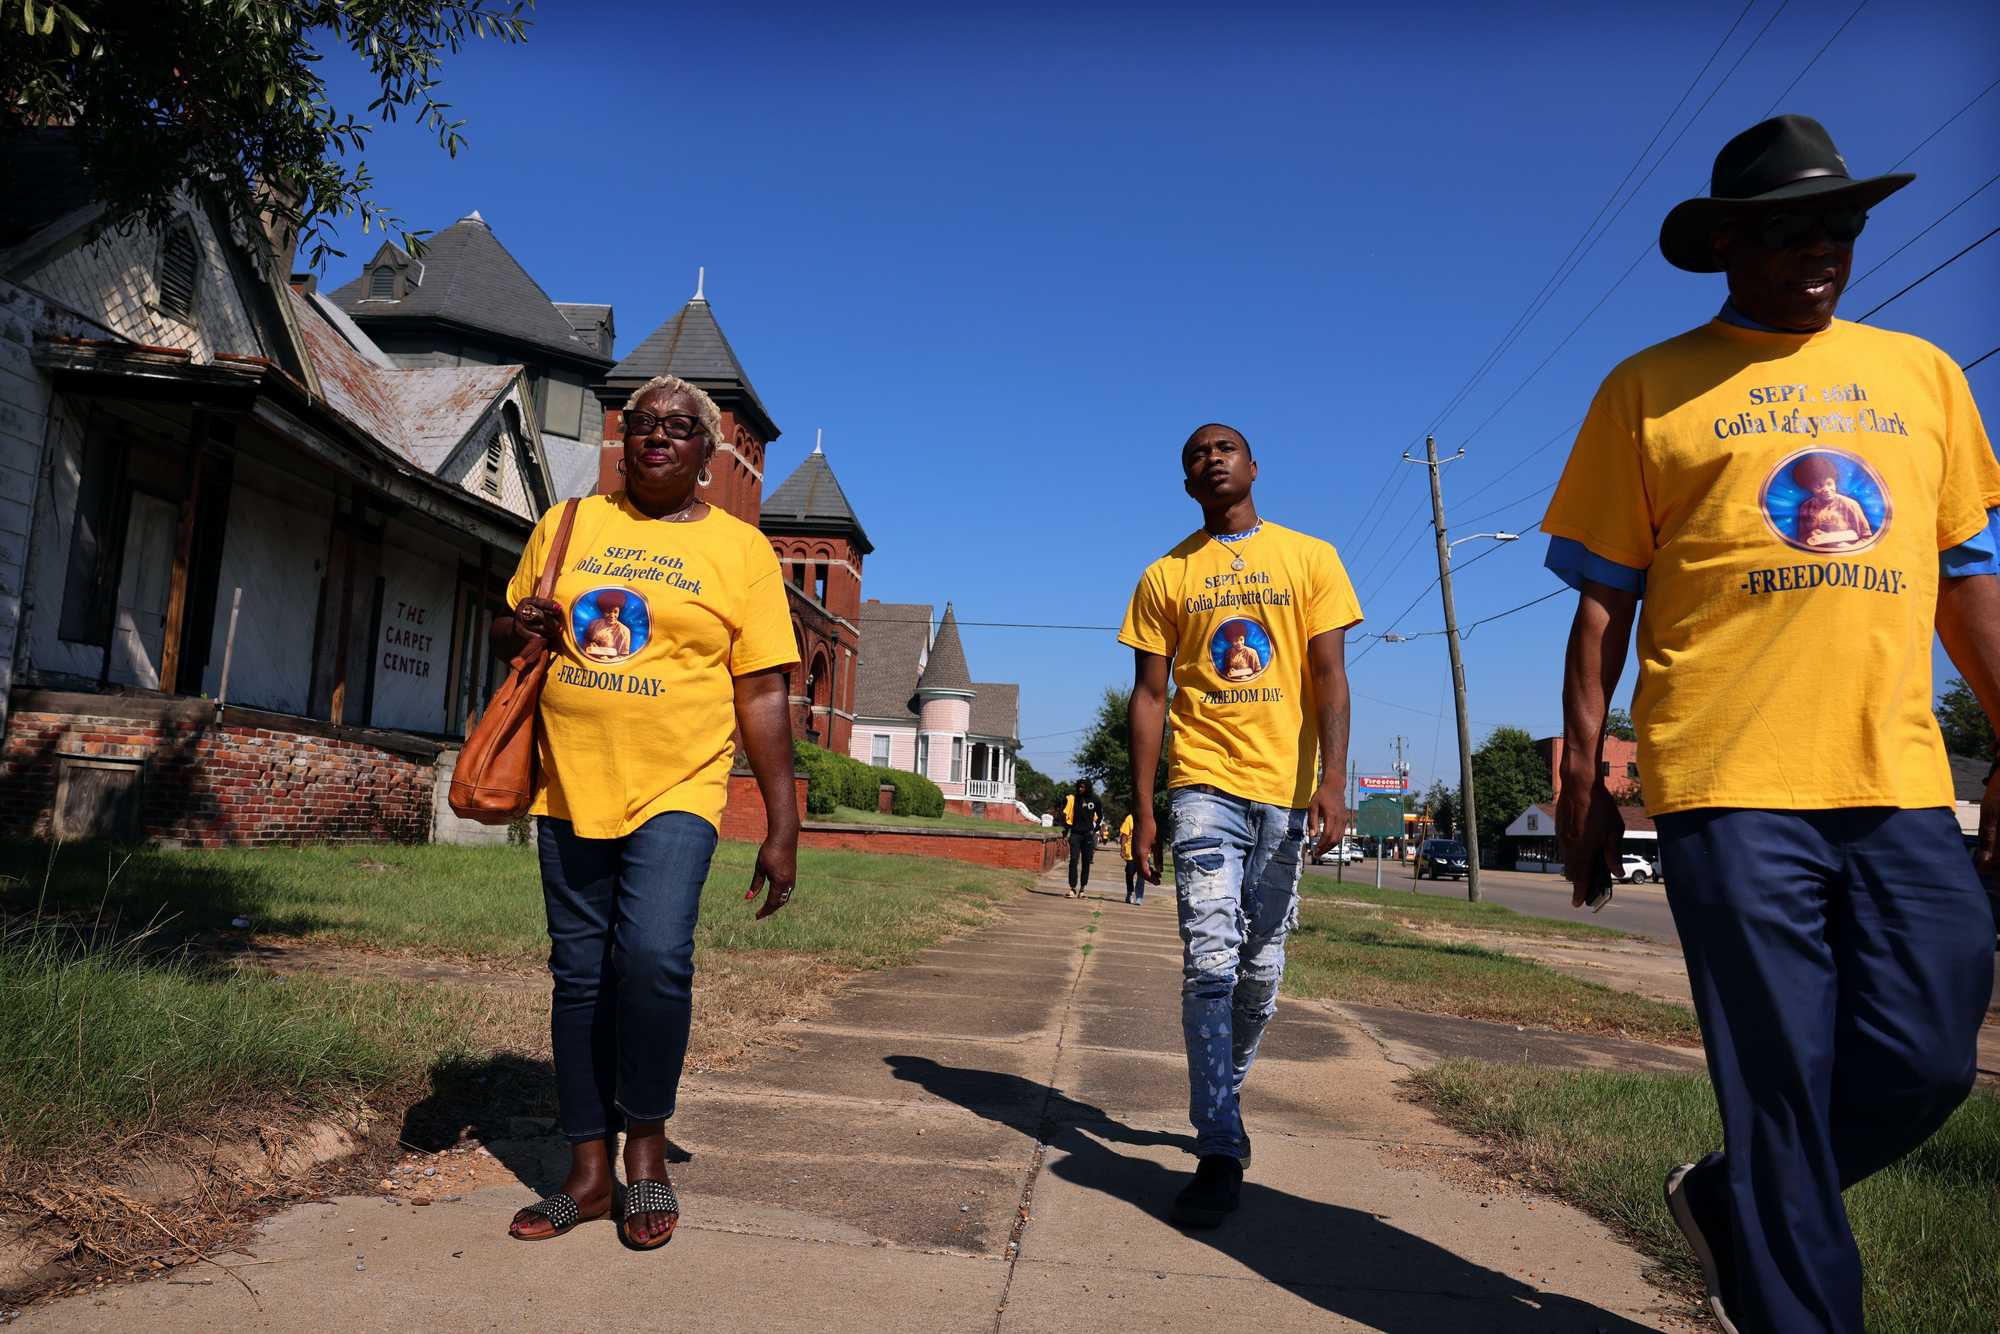 From left to right: Betty Boynton, Marvin White Jr., and organizer Charles Bonner led a march in Selma on Sept. 16. 